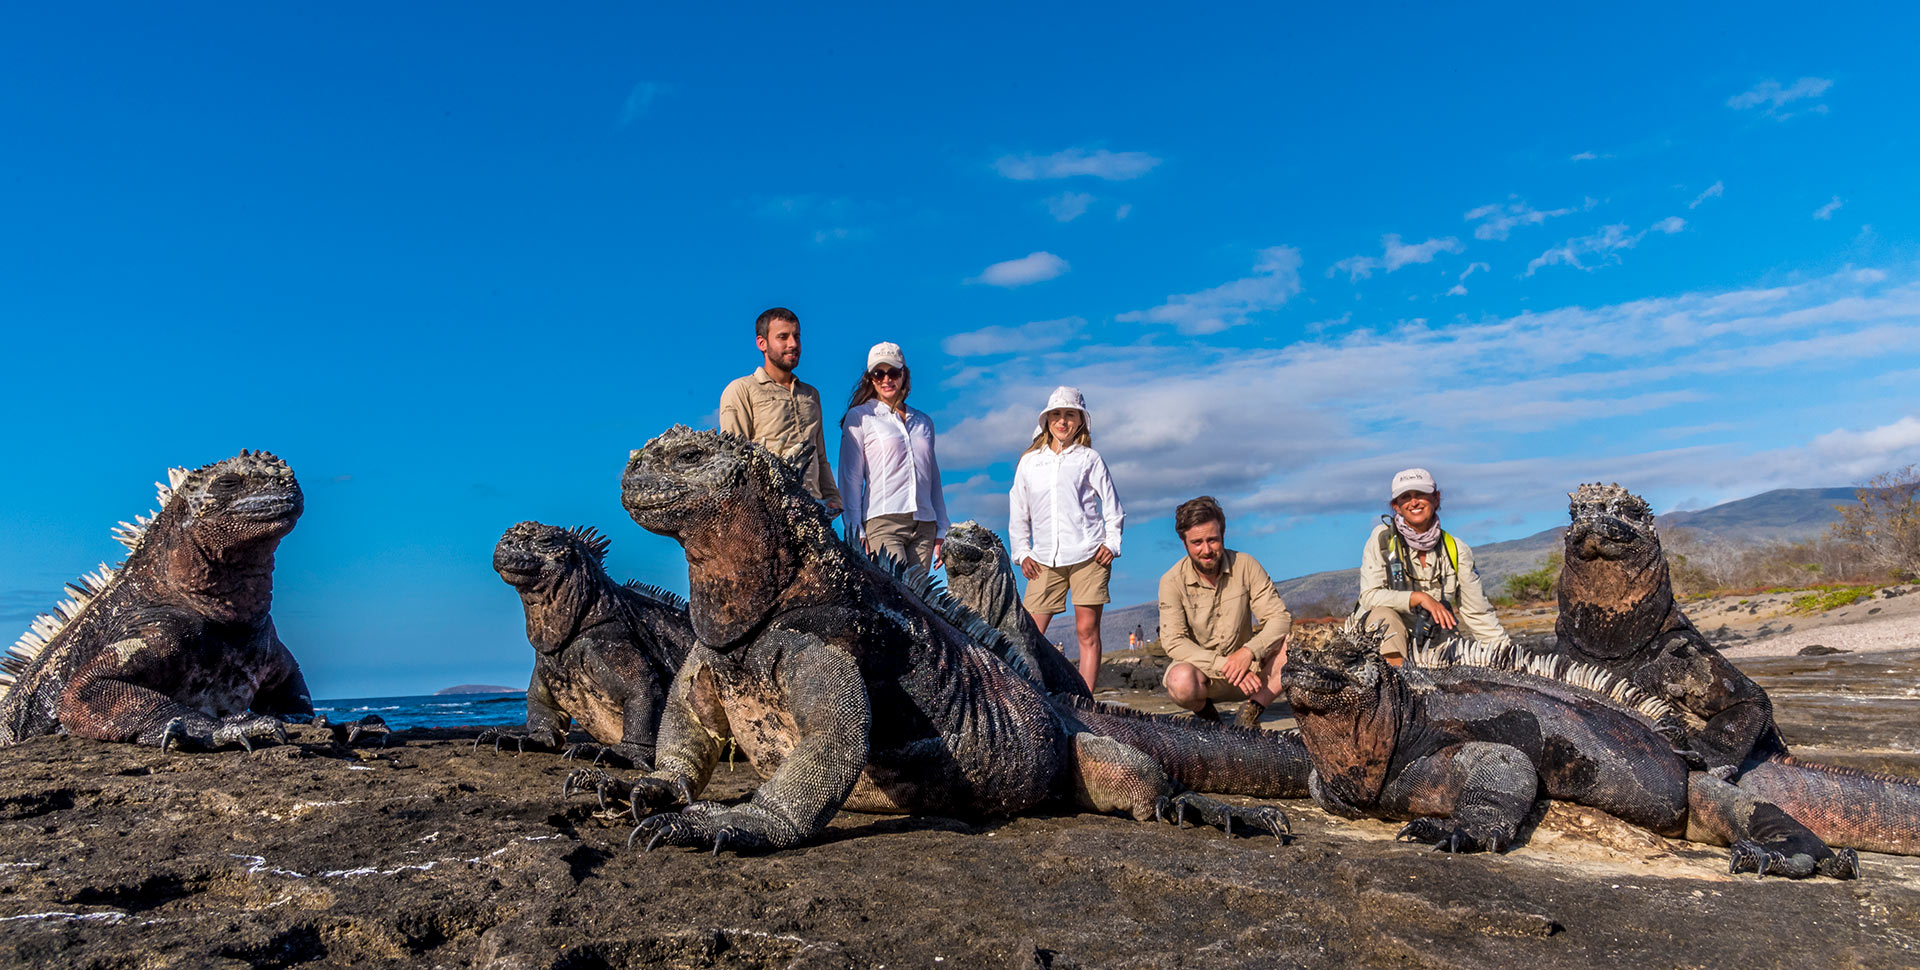 Wildlife observation in the Galapagos Islands